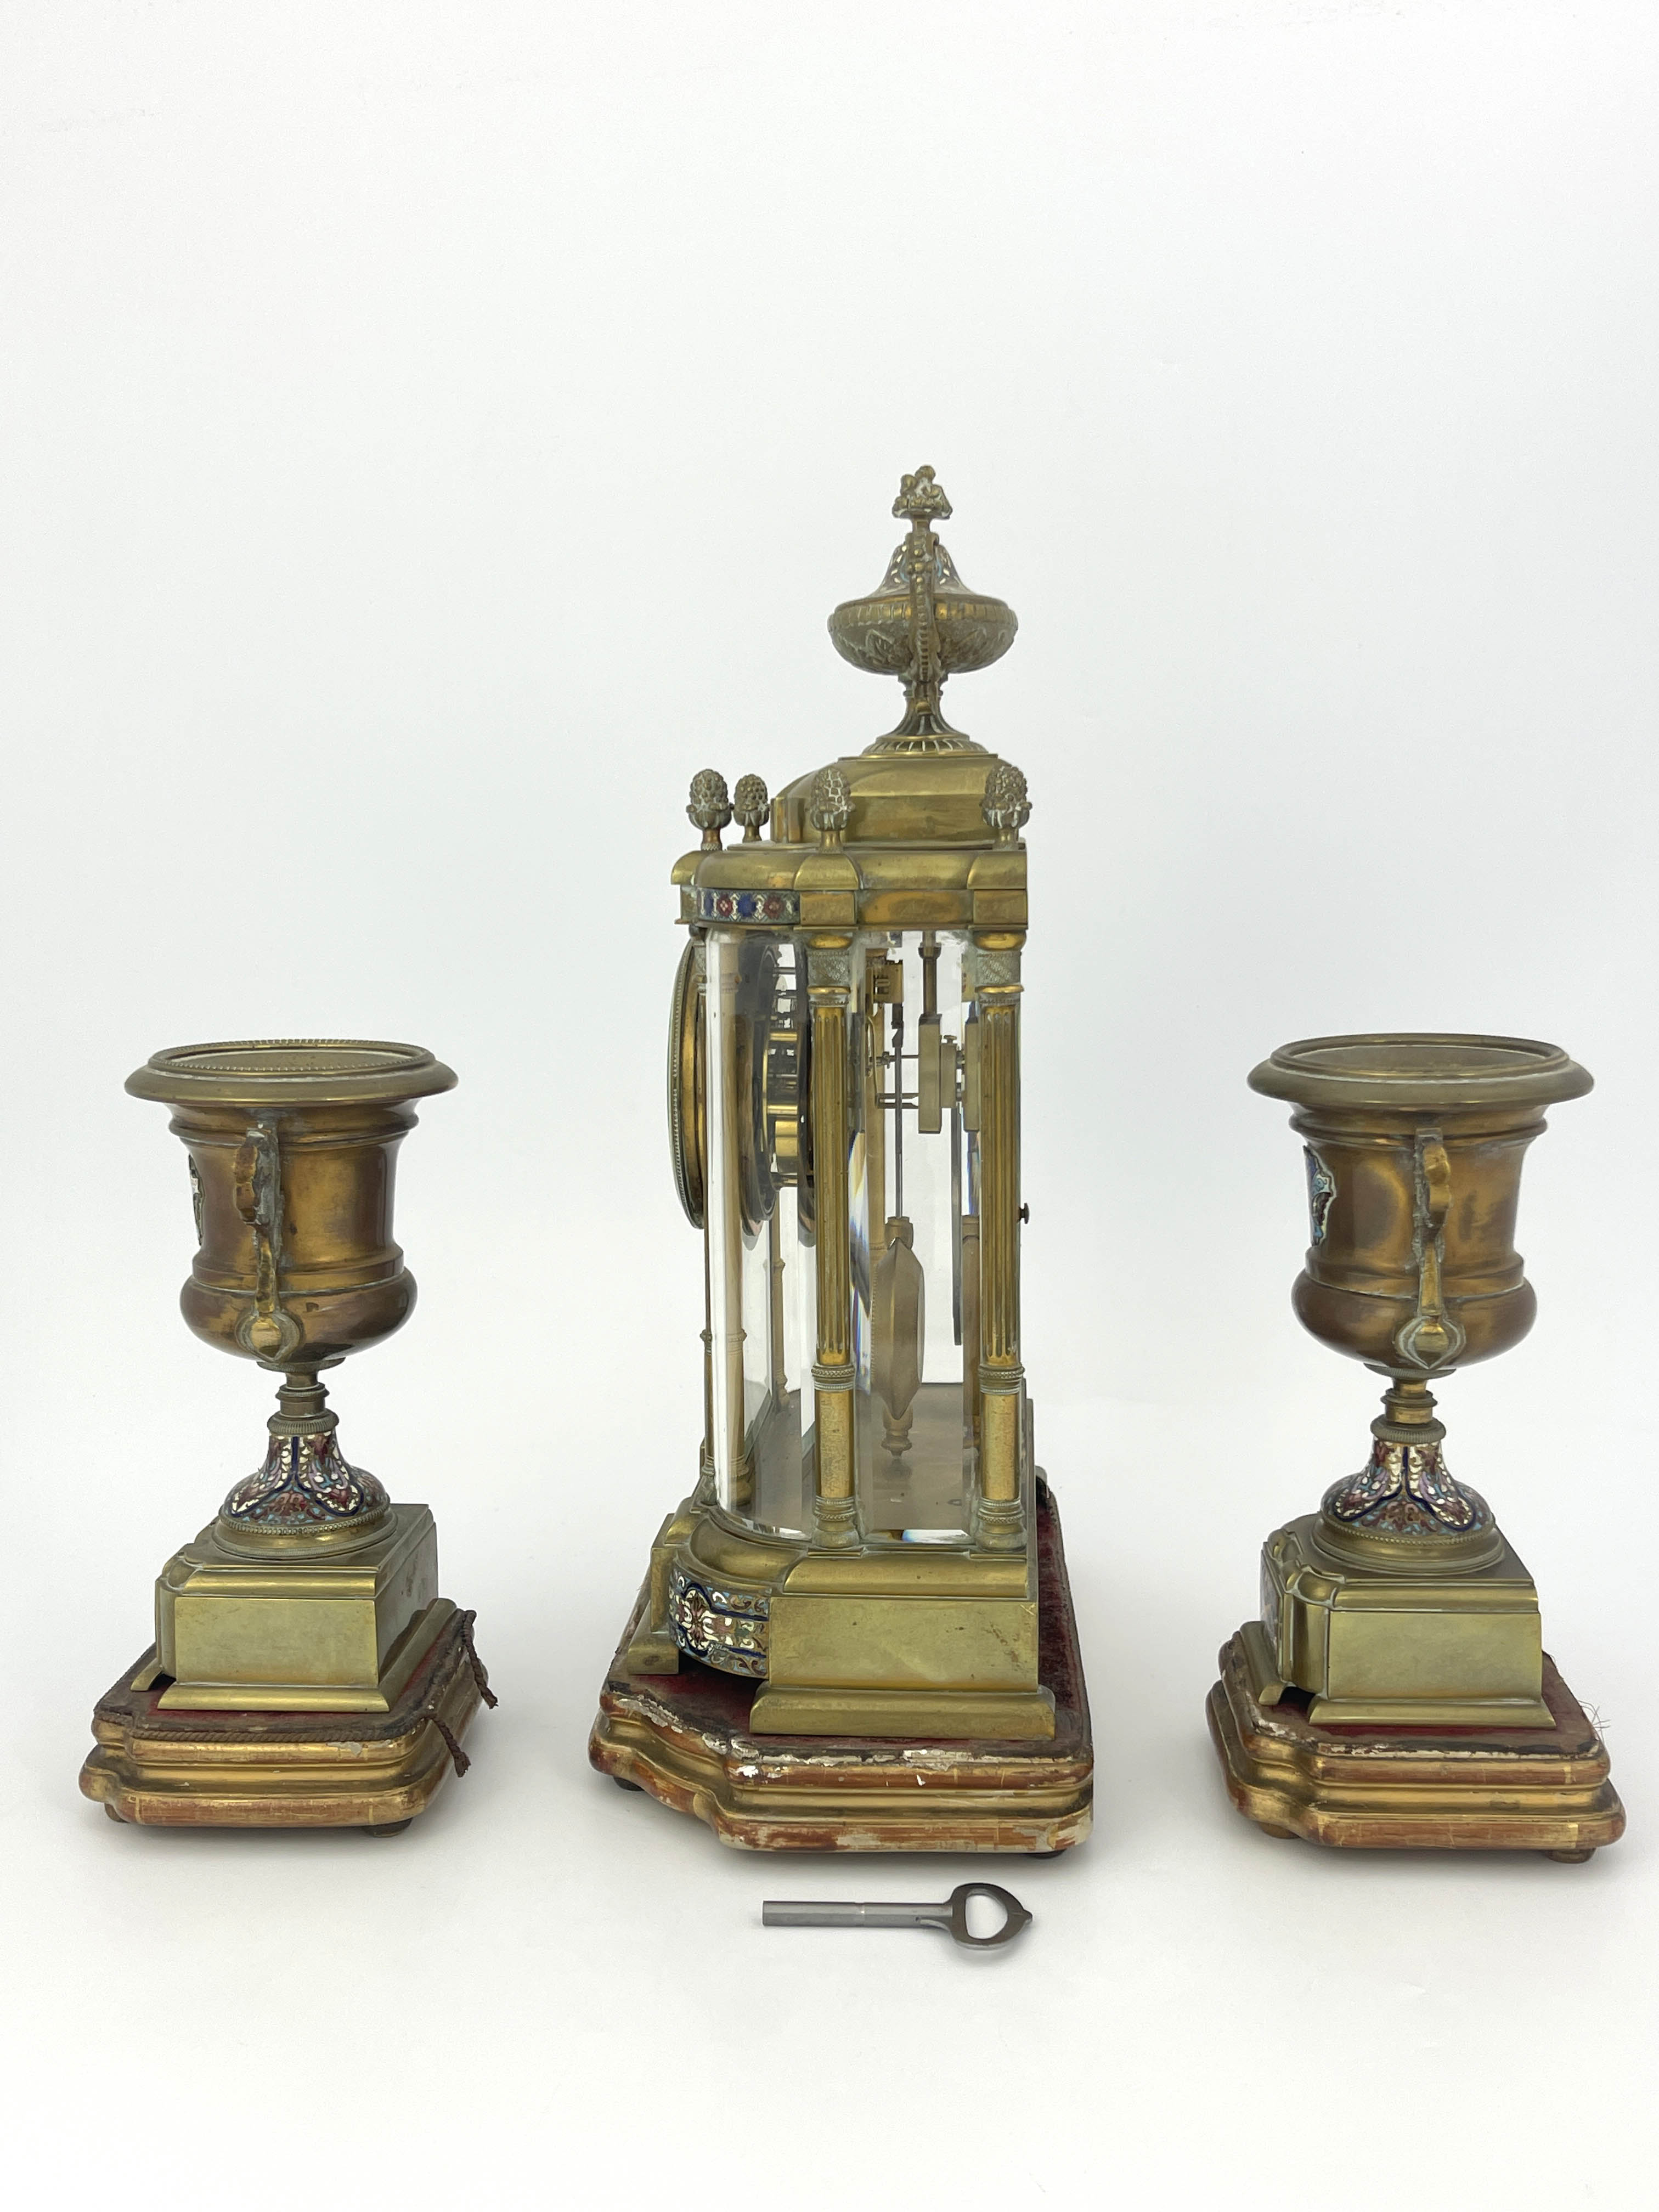 A French brass clock garniture, circa 1870, the breakfront case of Baroque architectural form with - Image 2 of 2